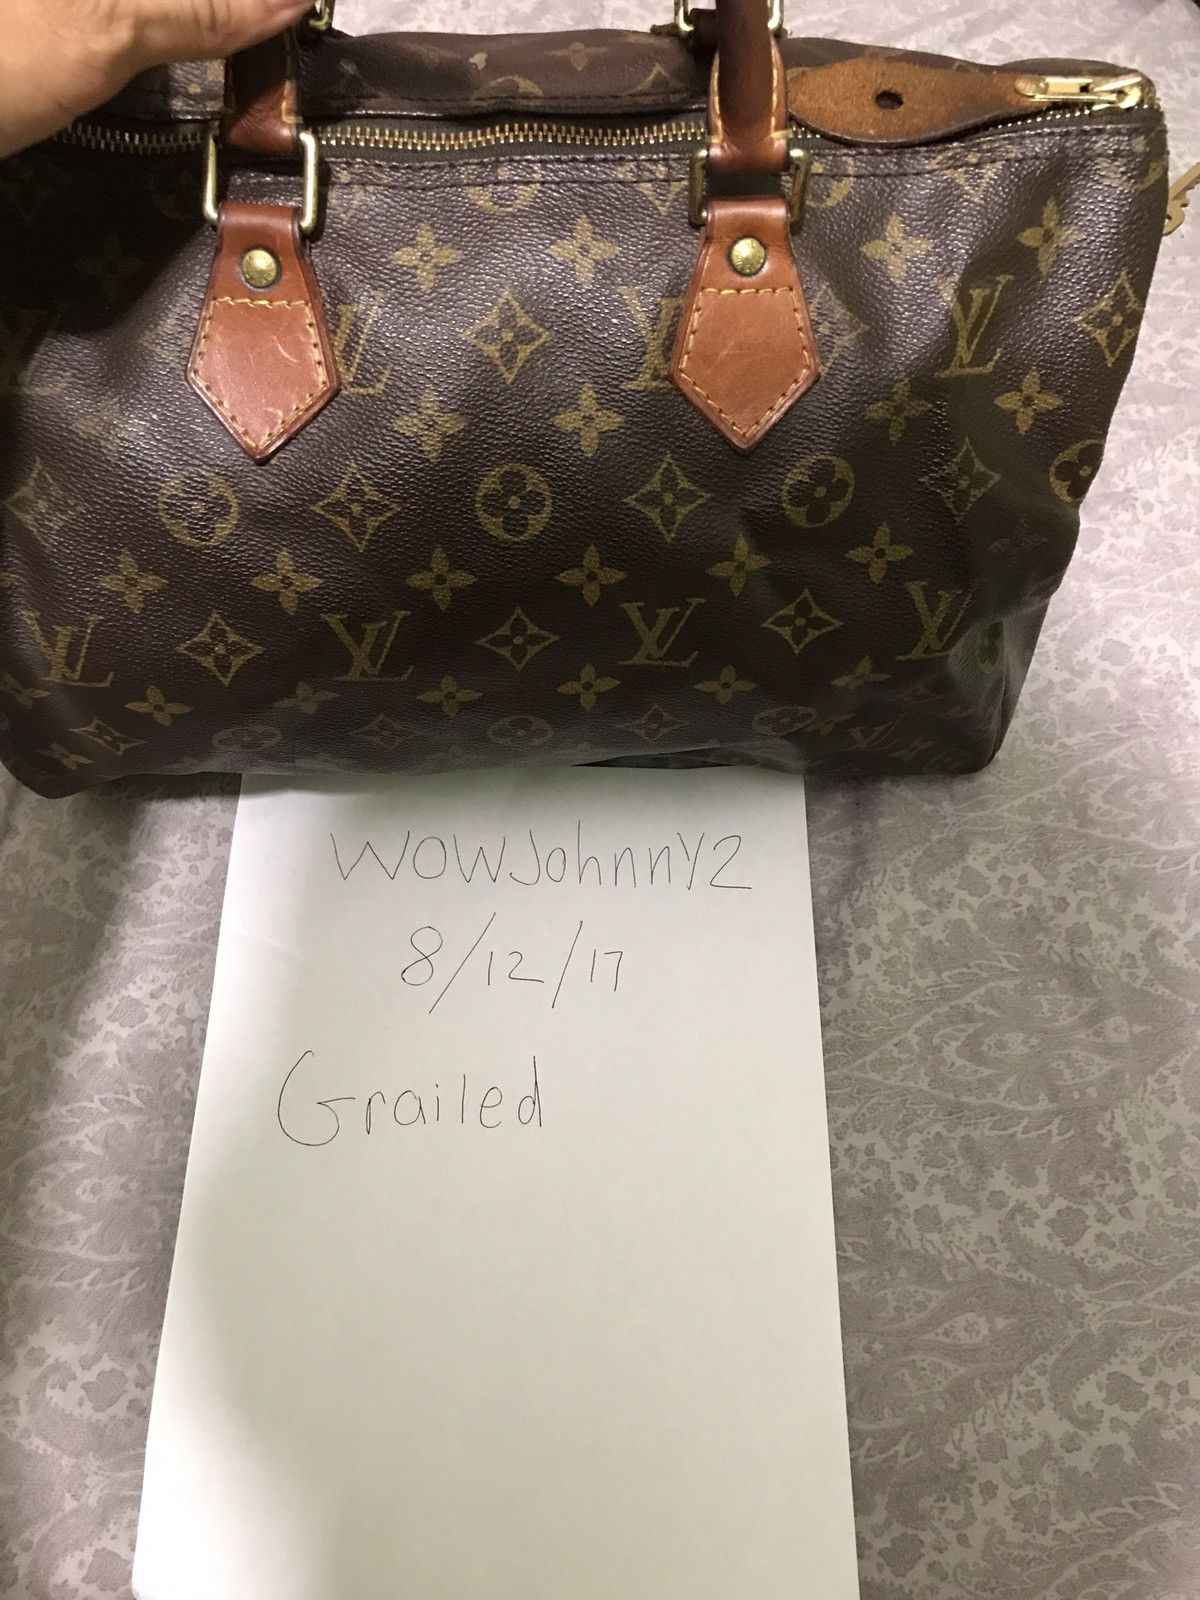 LV bowling ball bag in good condition